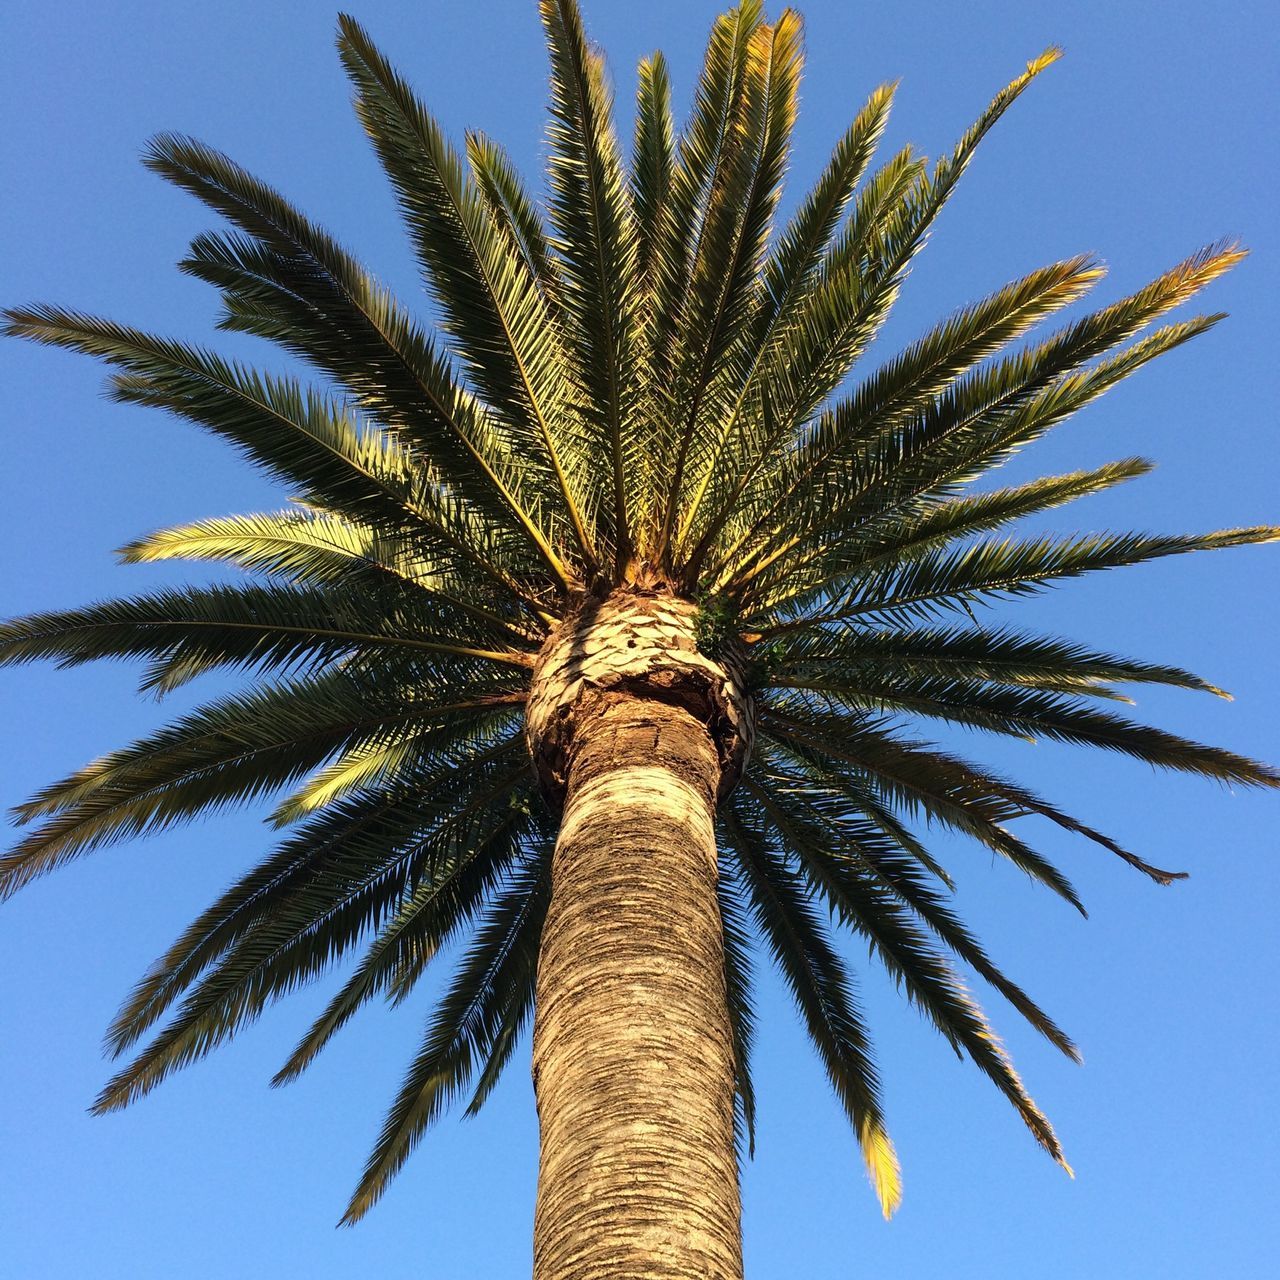 low angle view, palm tree, clear sky, blue, tree, growth, tree trunk, palm leaf, nature, tall - high, sky, coconut palm tree, tranquility, sunlight, day, tropical tree, no people, outdoors, beauty in nature, palm frond